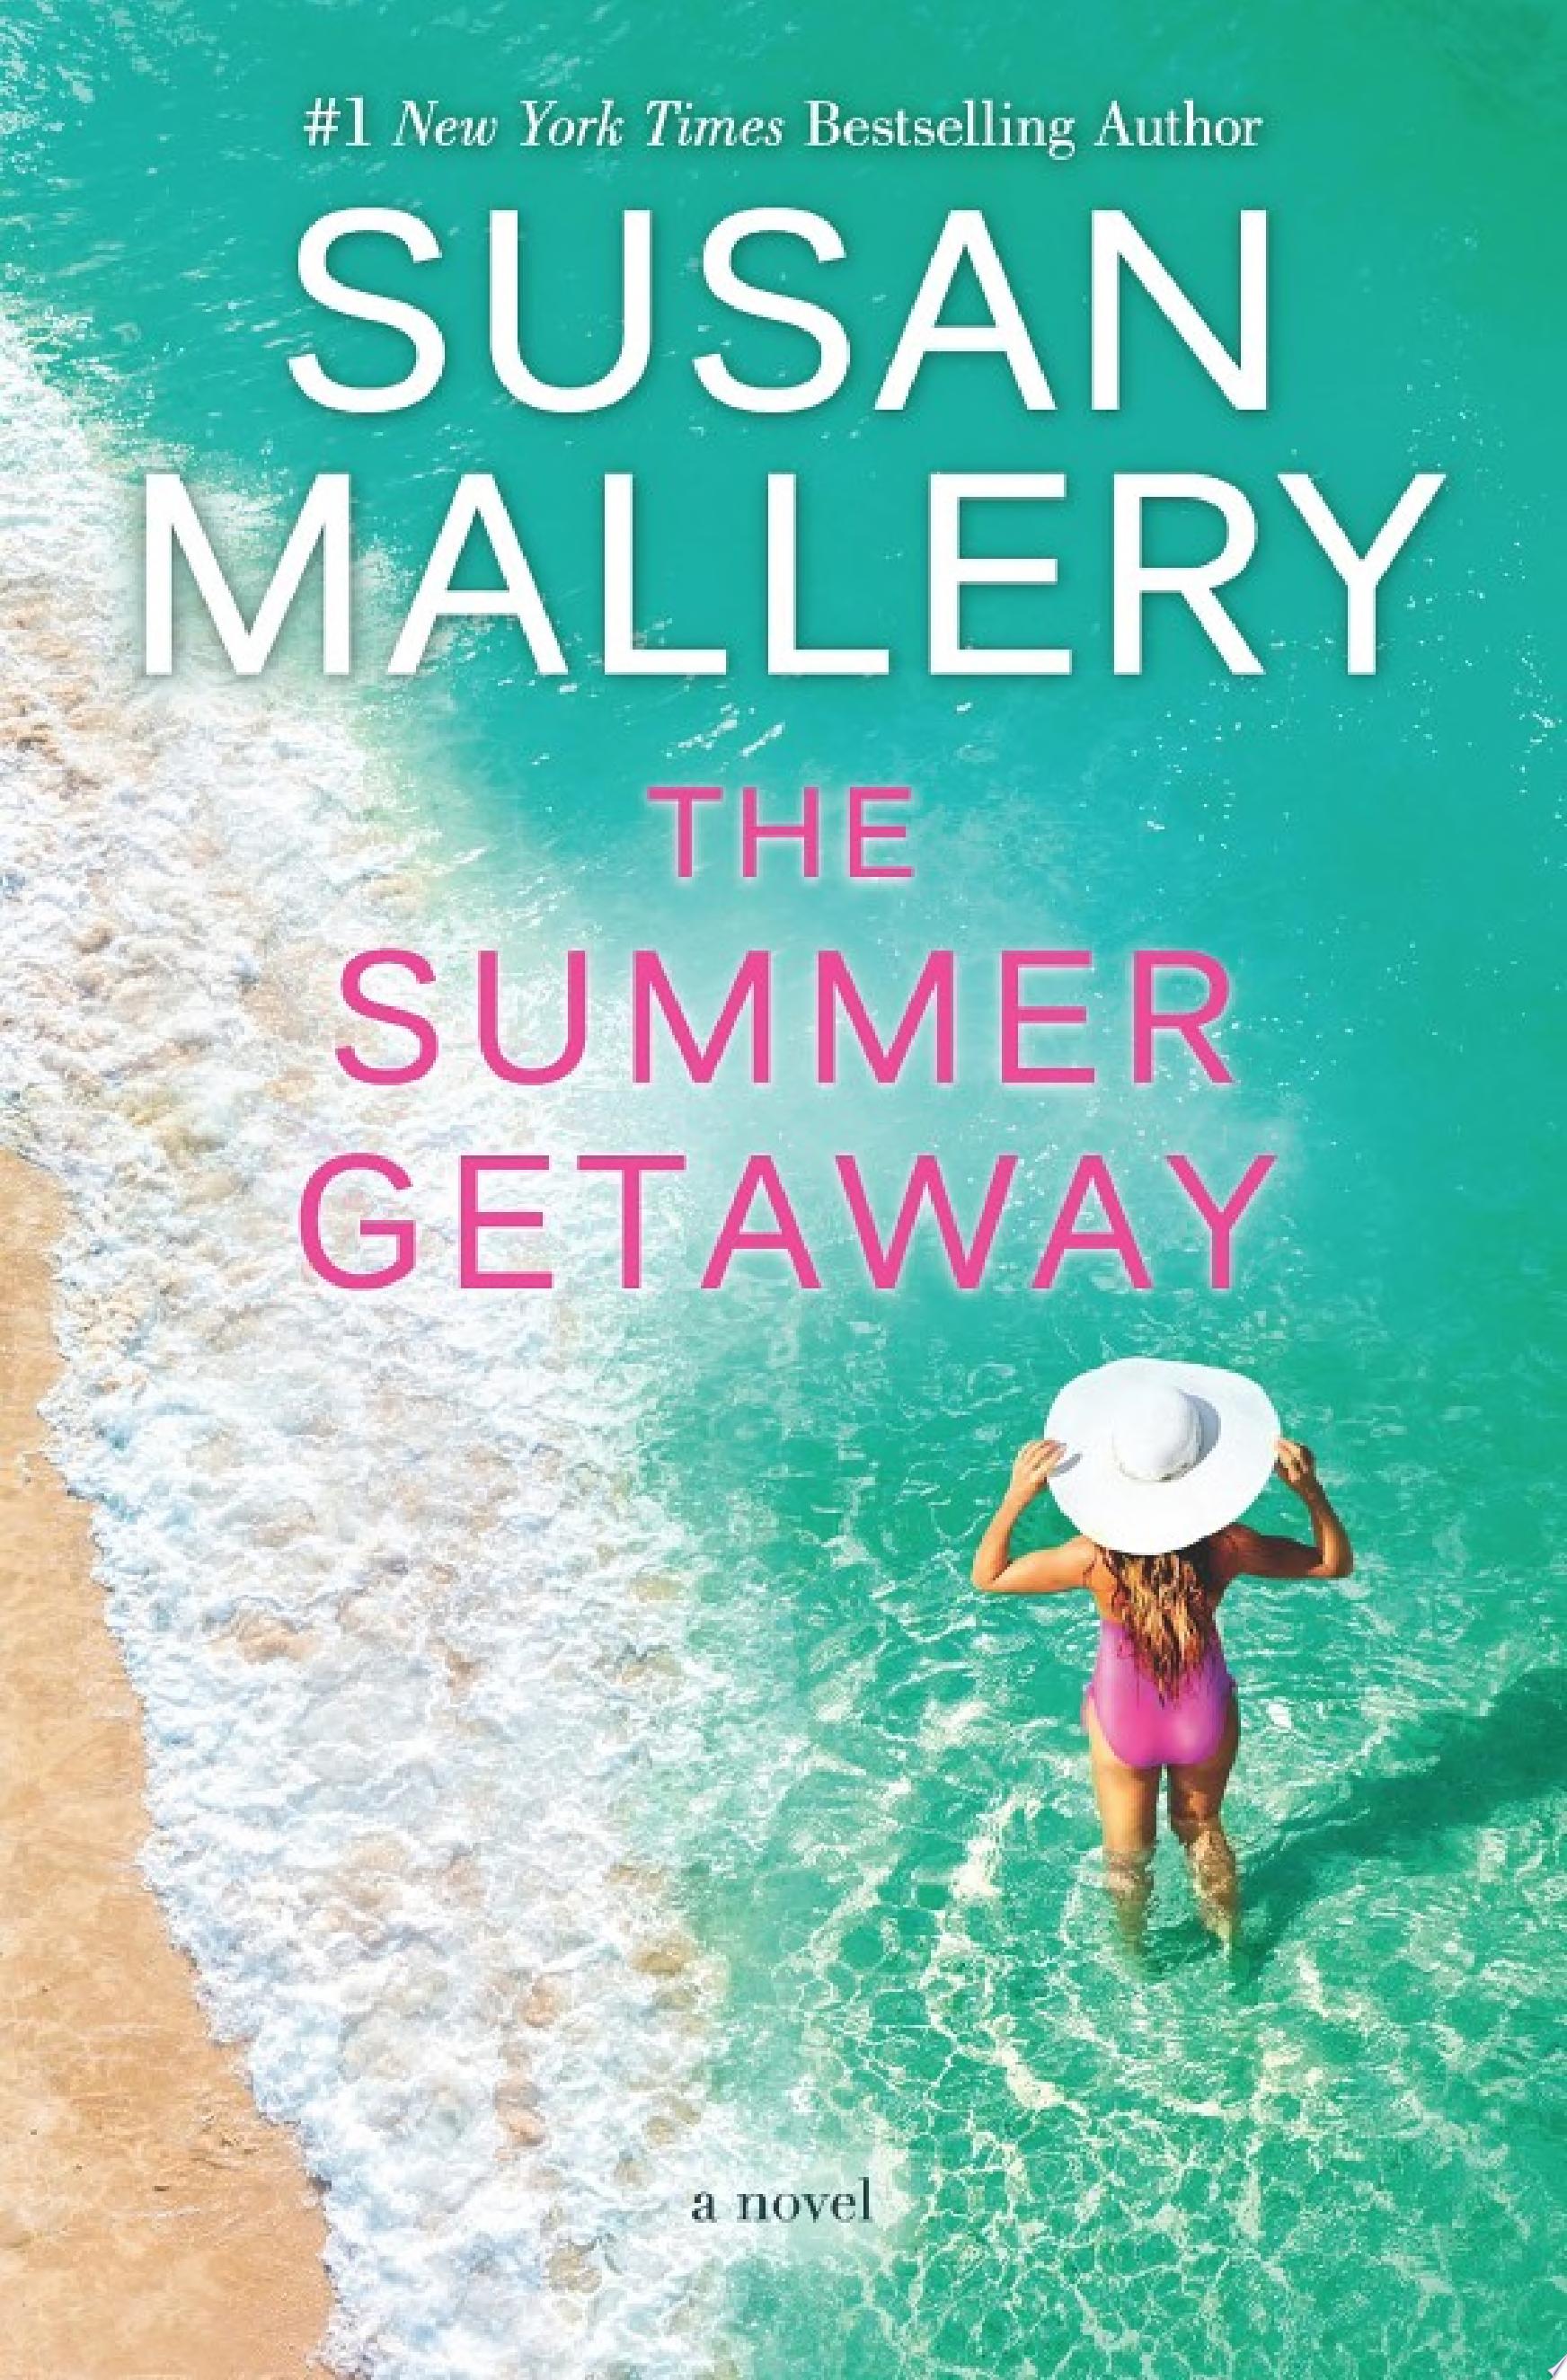 Image for "The Summer Getaway"